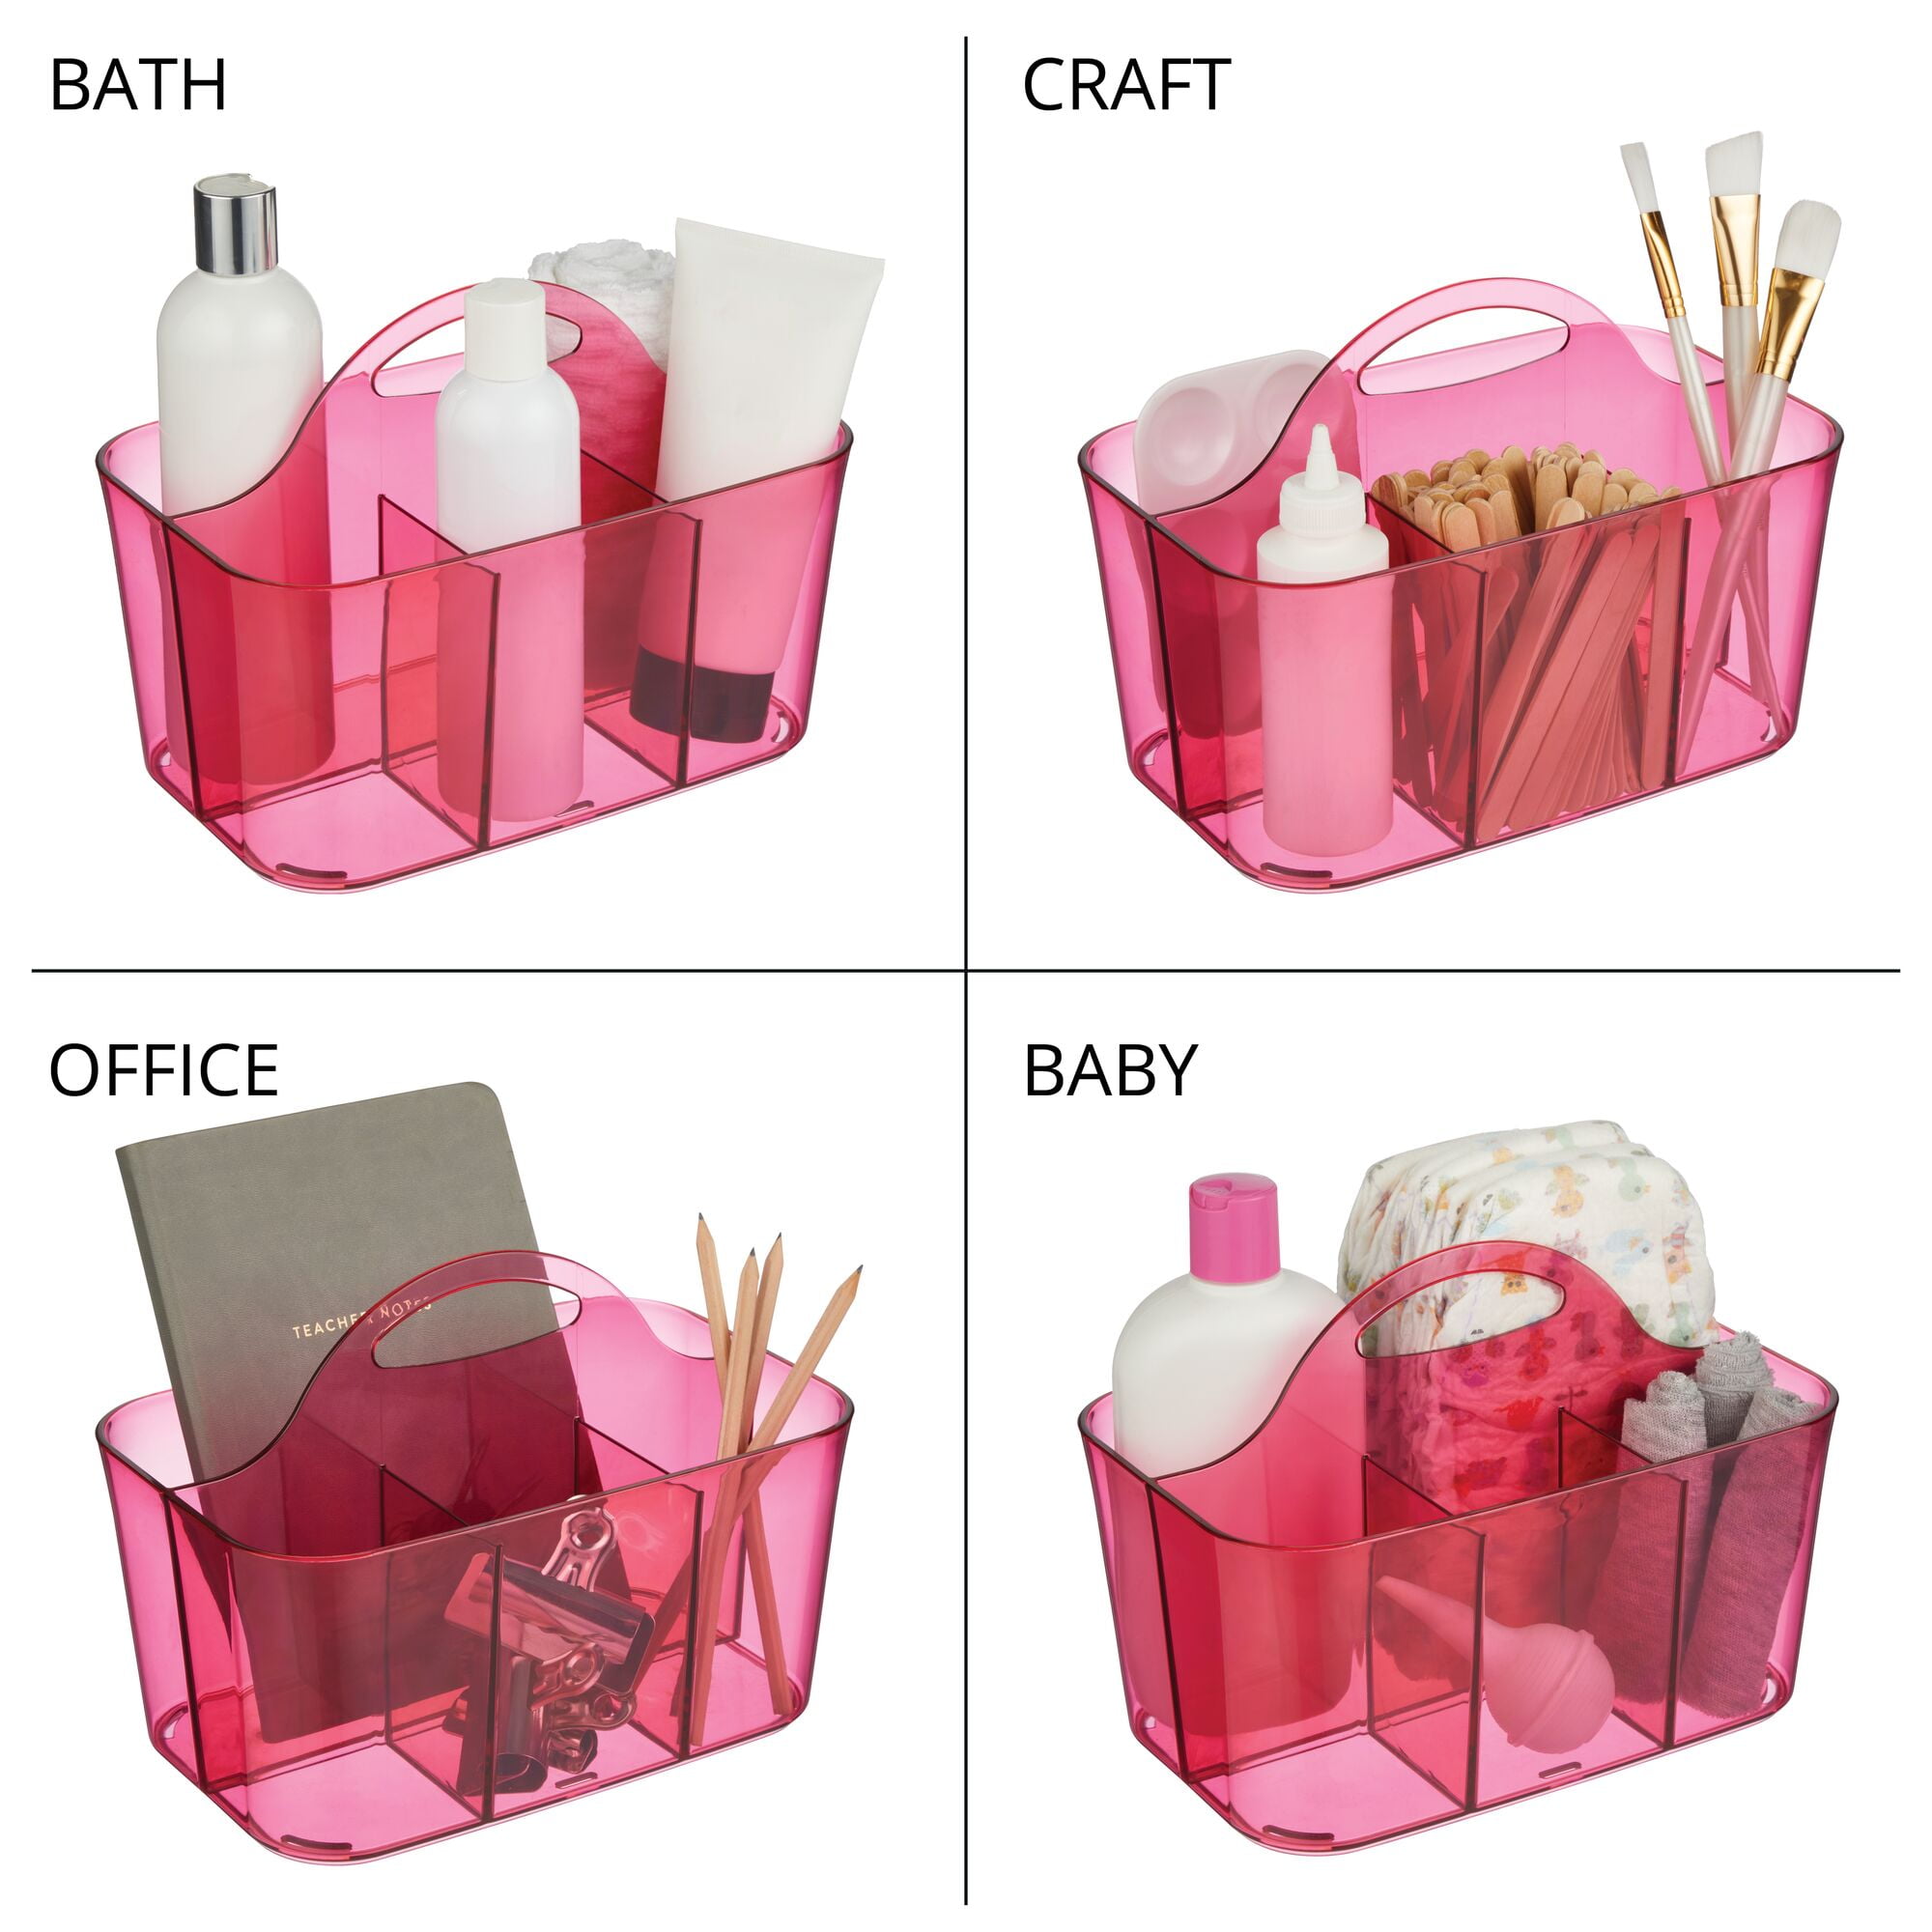 Wrapables Quick Dry Portable Mesh Shower Caddy/Tote/Organizer Pink